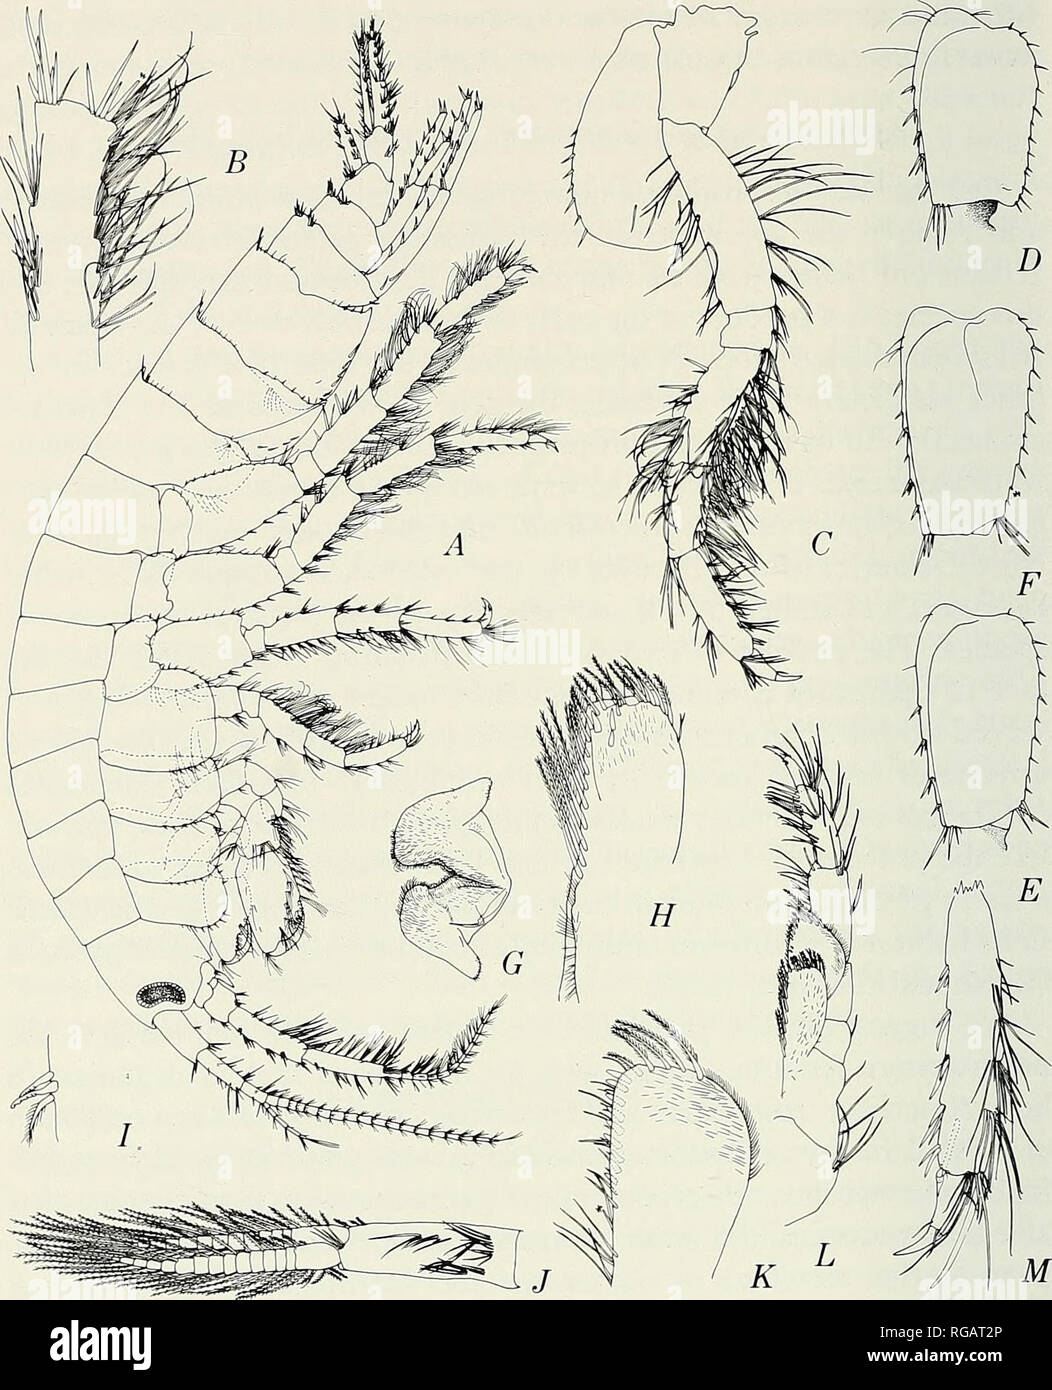 . Bulletin of the Southern California Academy of Sciences. Science; Natural history; Natural history. 222 Bulletin So. Calif. Academy Sciences I Vol. 67, No. 4, ig68. Figure 1. Gammarus (Mucrogammarus) mucronatus Say, male, 9.0 mm, Salton Sea: A, lateral view of body; B, article 5 of pereopod 4 (upside down); C, pereo- pod 1; D, E, F, article 2 of pereopods 3, 4, 5; G, lower lip; H, inner plate of maxilliped; I, coupling hooks of pleopod 1; J, pleopod 1; K, outer plate of maxil- liped; L, maxilliped; M, articles 6-7 of pereopod 4.. Please note that these images are extracted from scanned page  Stock Photo